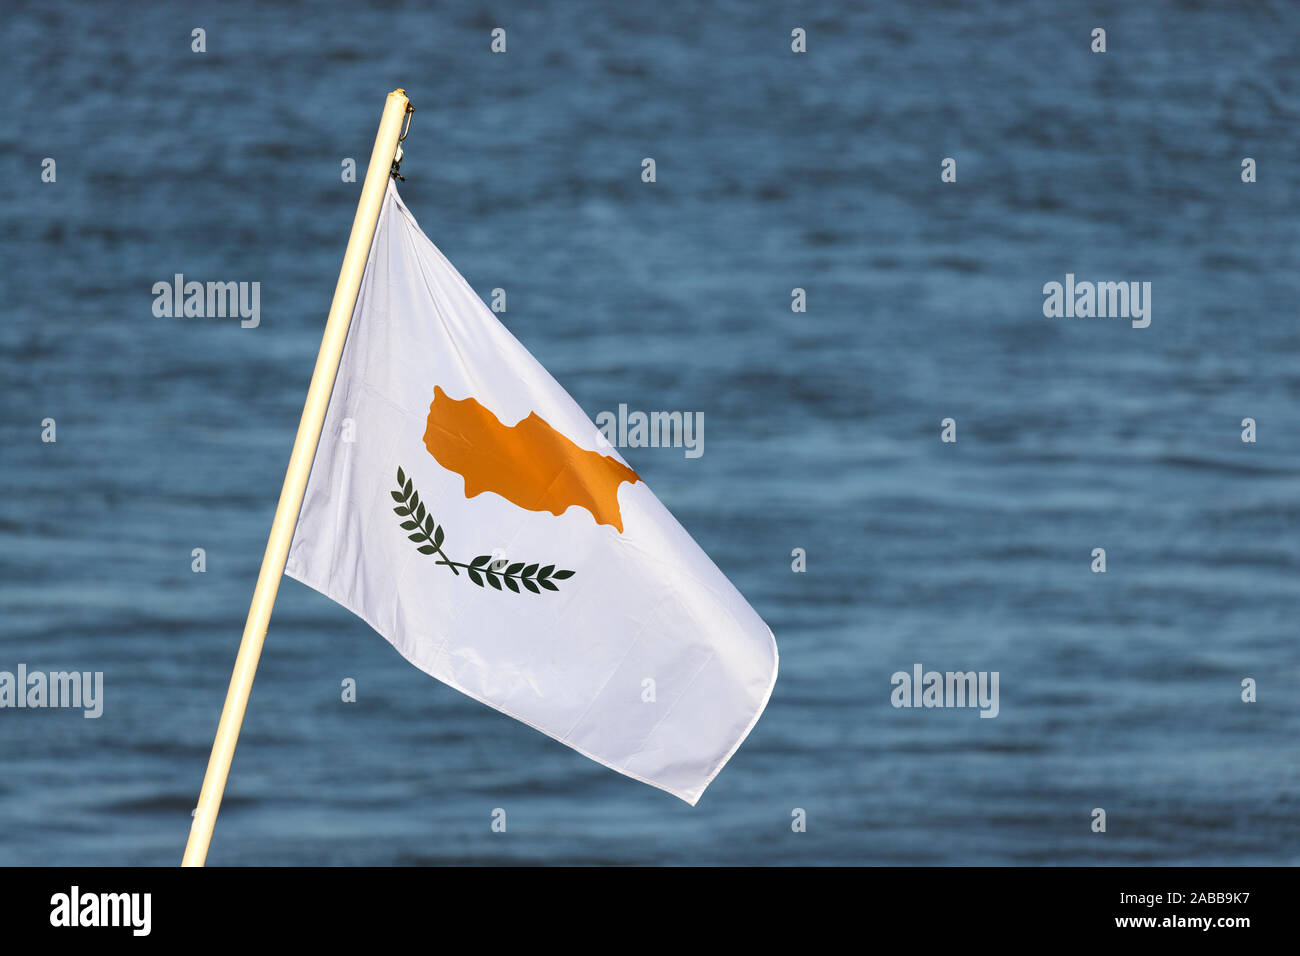 Cypriot flag on the stern of a ship Stock Photo